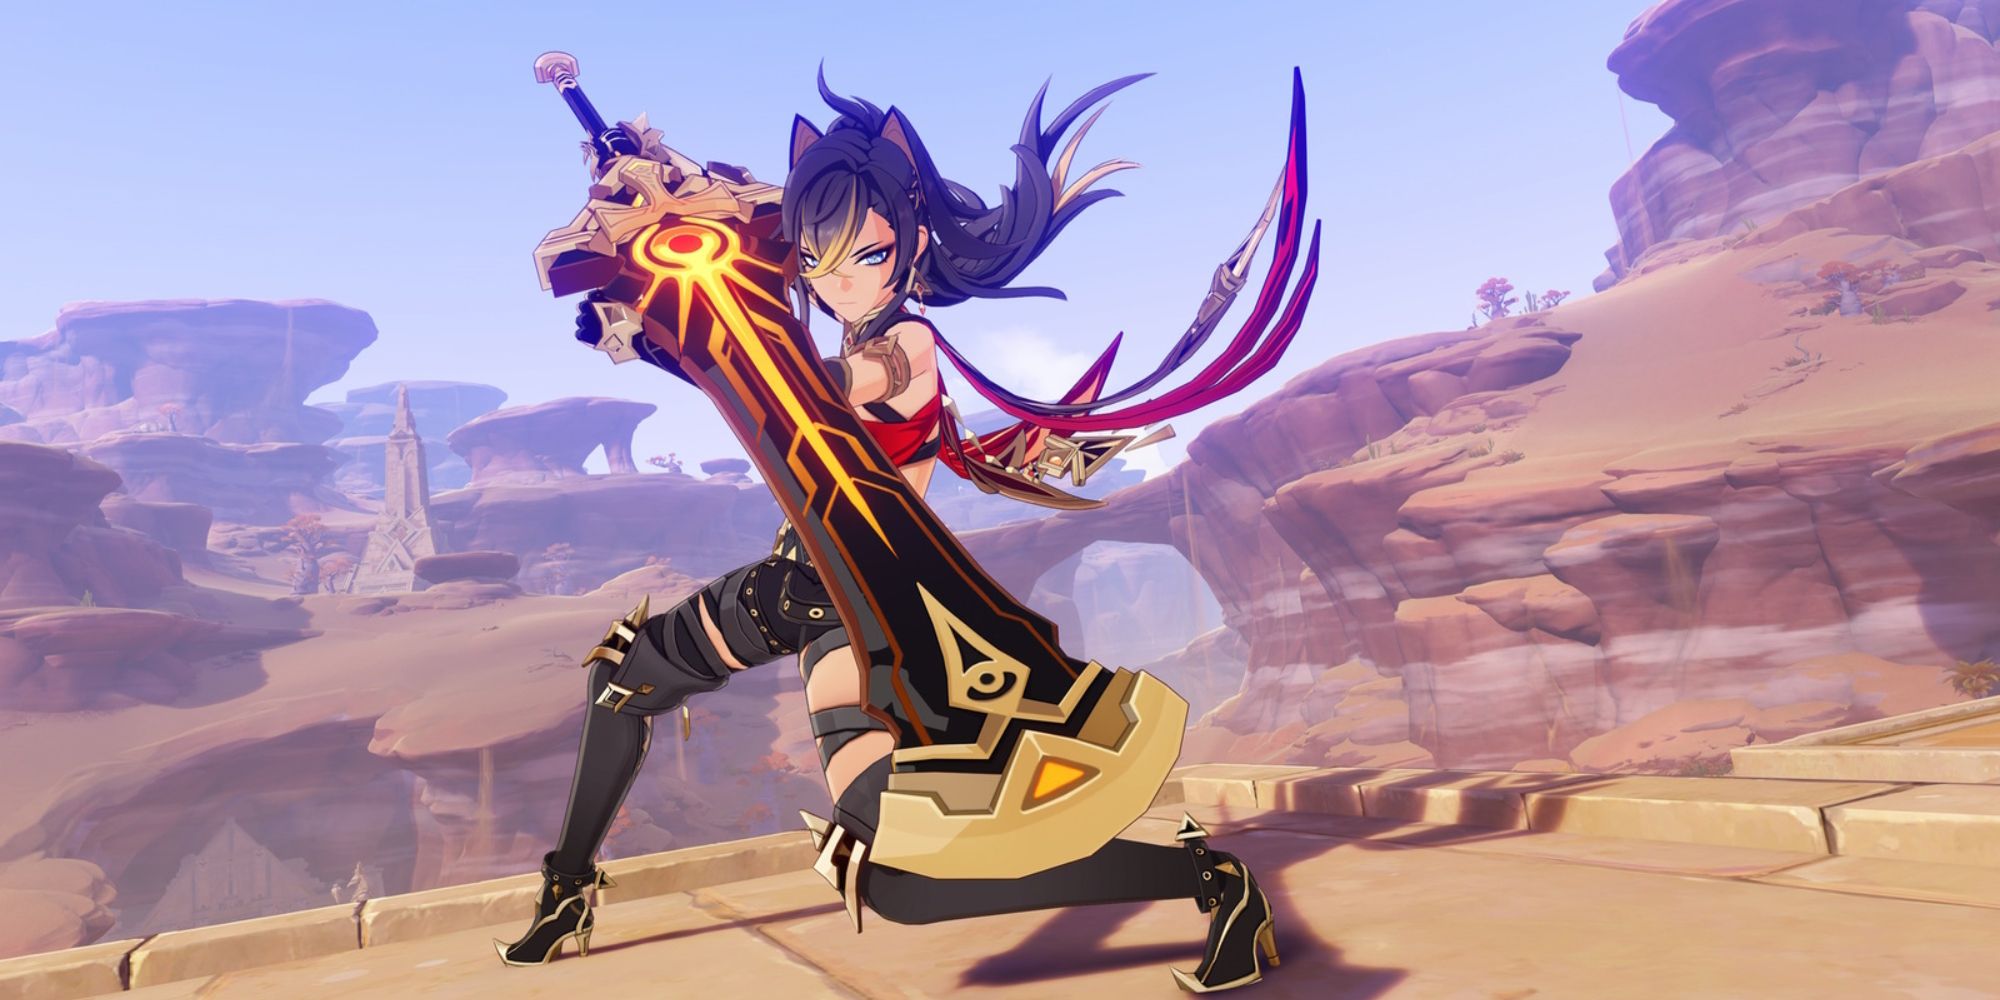 An image Dehya Genshin Impact standing with her great sword in the desert.